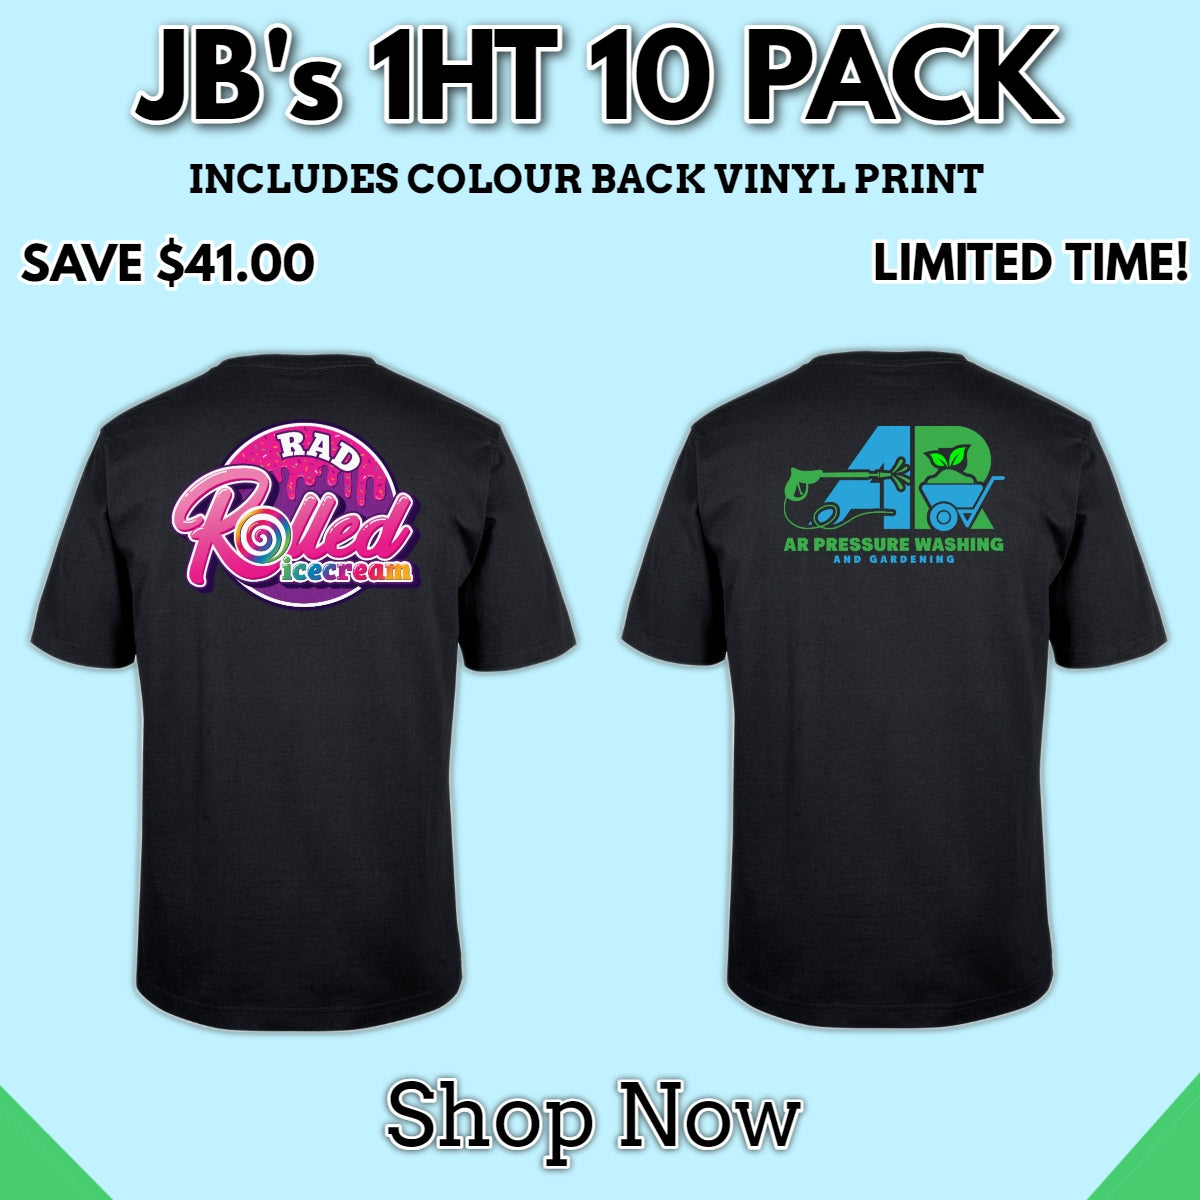 JB's 1HT 10 Pack | Full Colour Back Print Included - Safe-T-Rex Workwear Pty Ltd